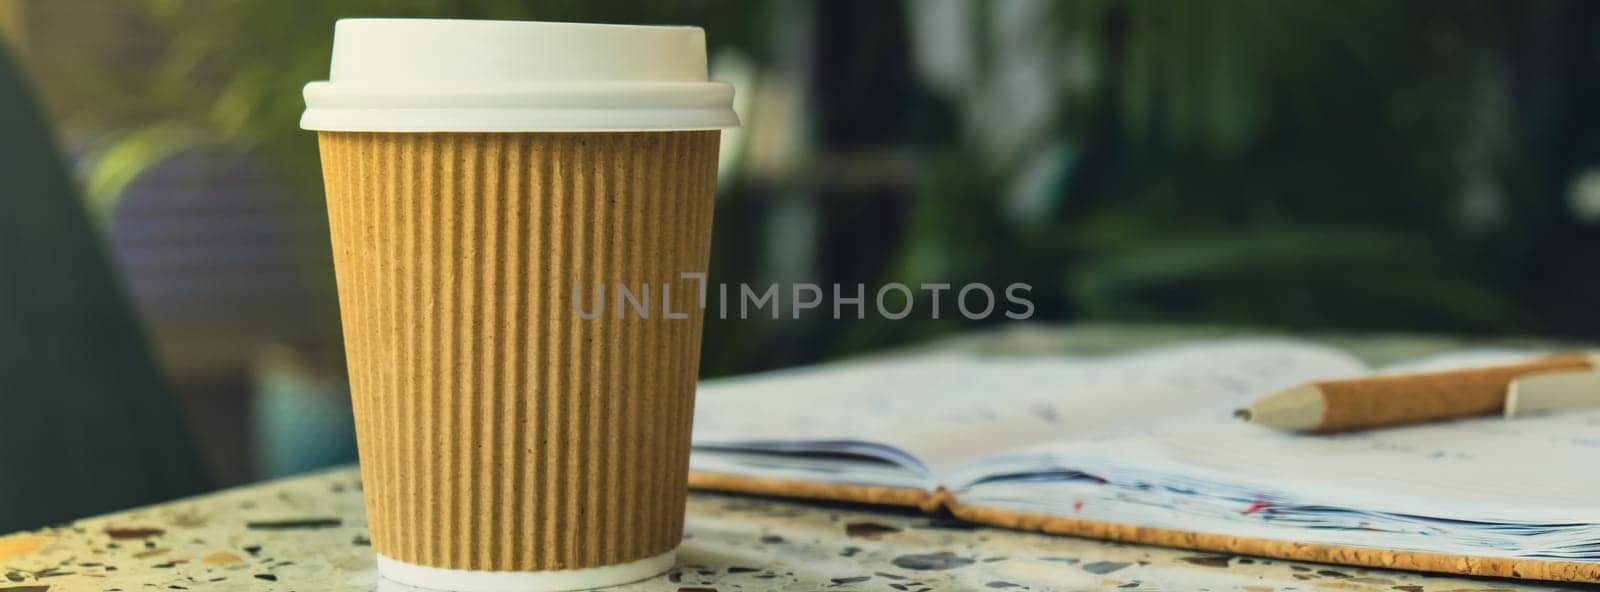 Hot latte coffee in craft recycling paper cup with paper notebook. A take away paper cup on cafe table. Freelance Workspace notebook with coffee for productive work and study. Working comfortably. Empty workspace. Blurred background. Mockup Coffee break. Online job or studying co-working space